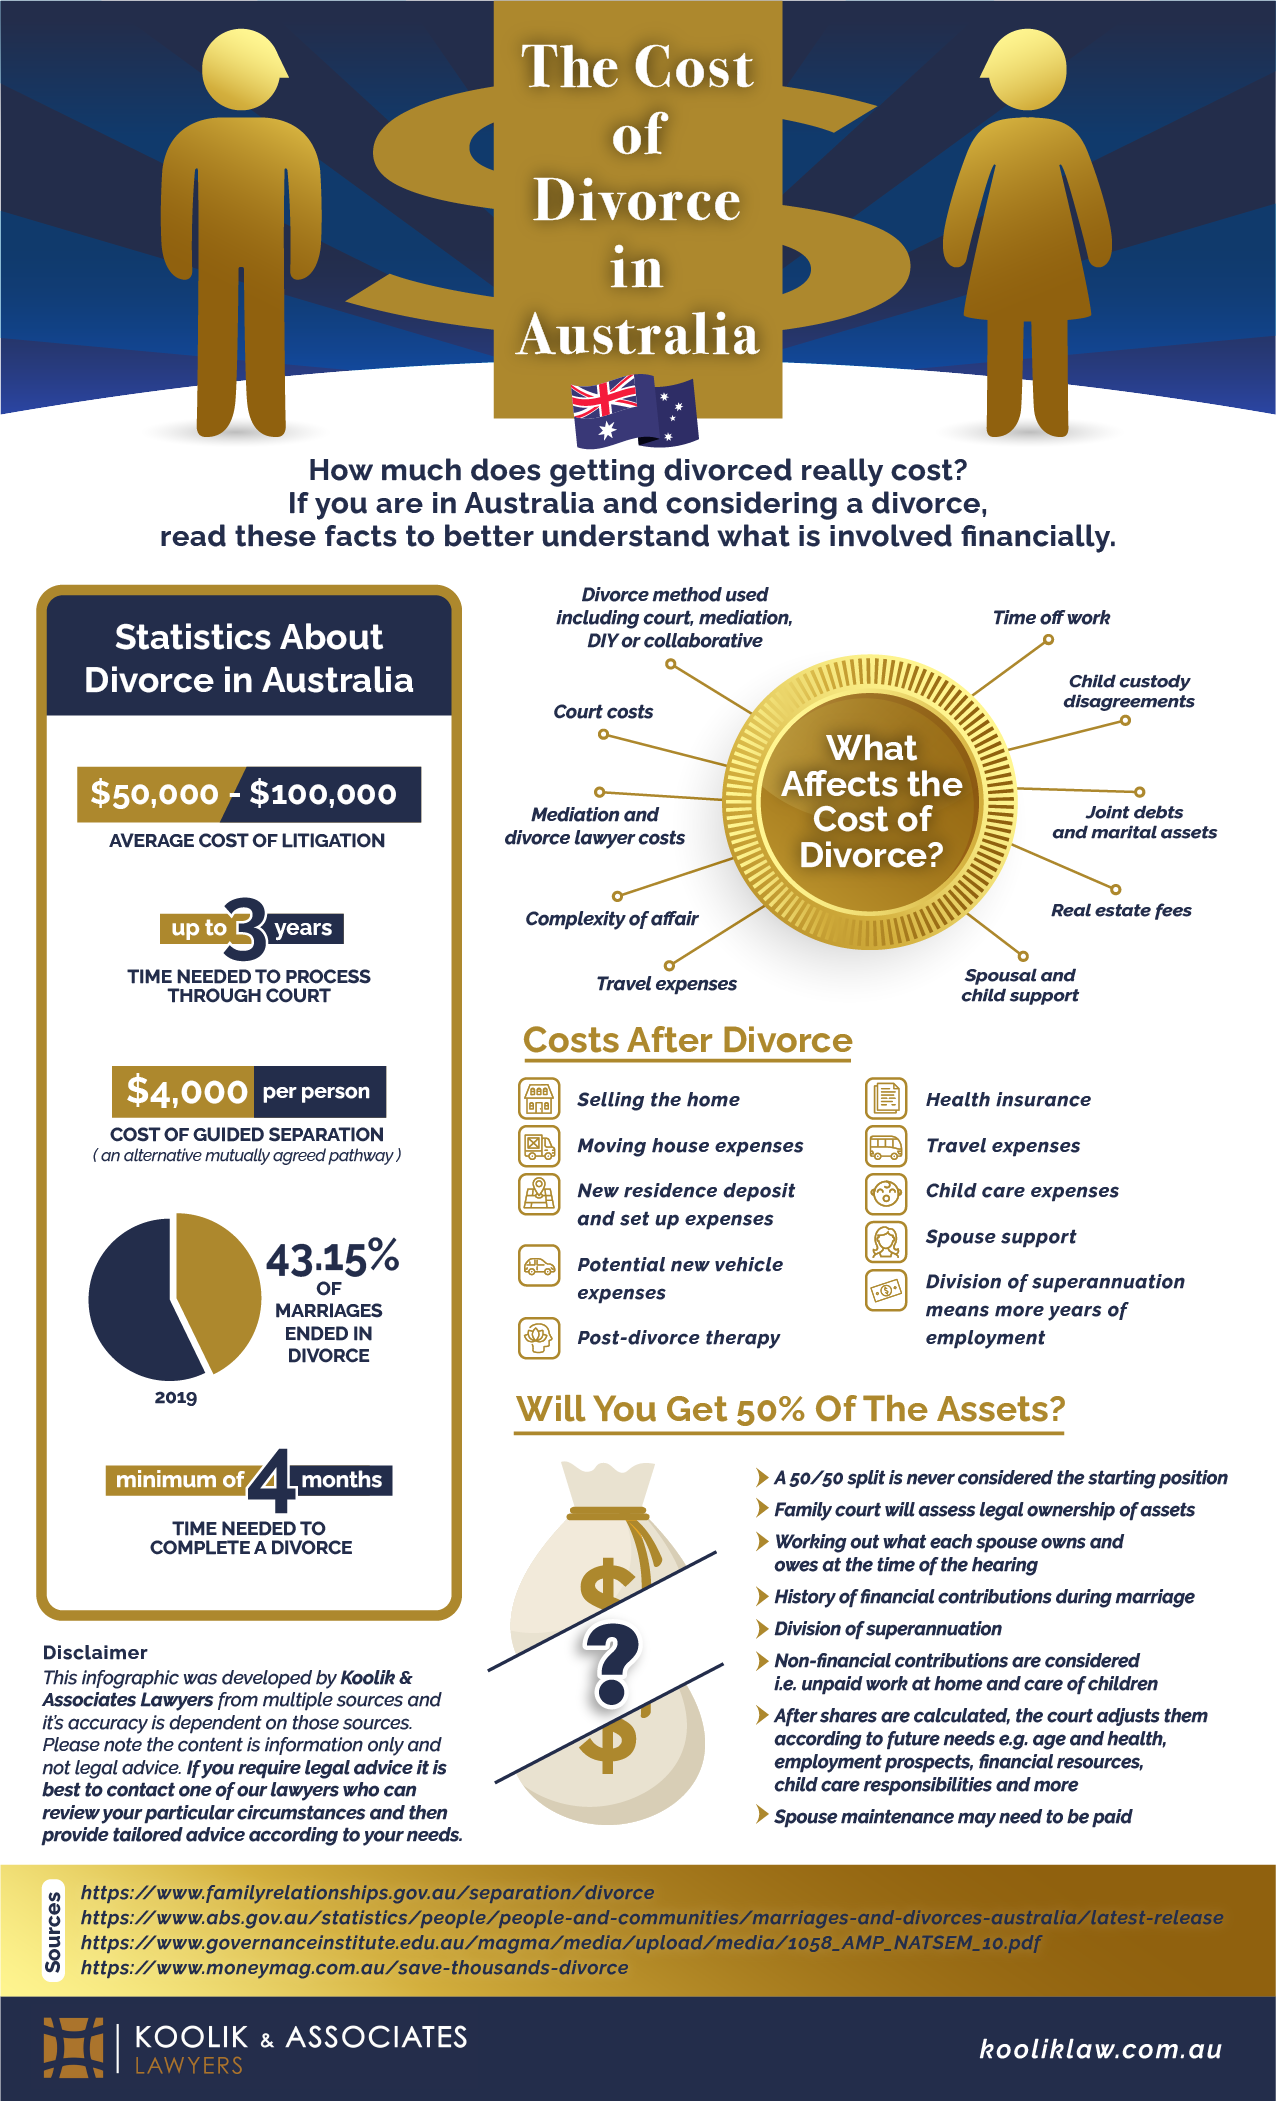 An infographic about the cost of divorce in Australia